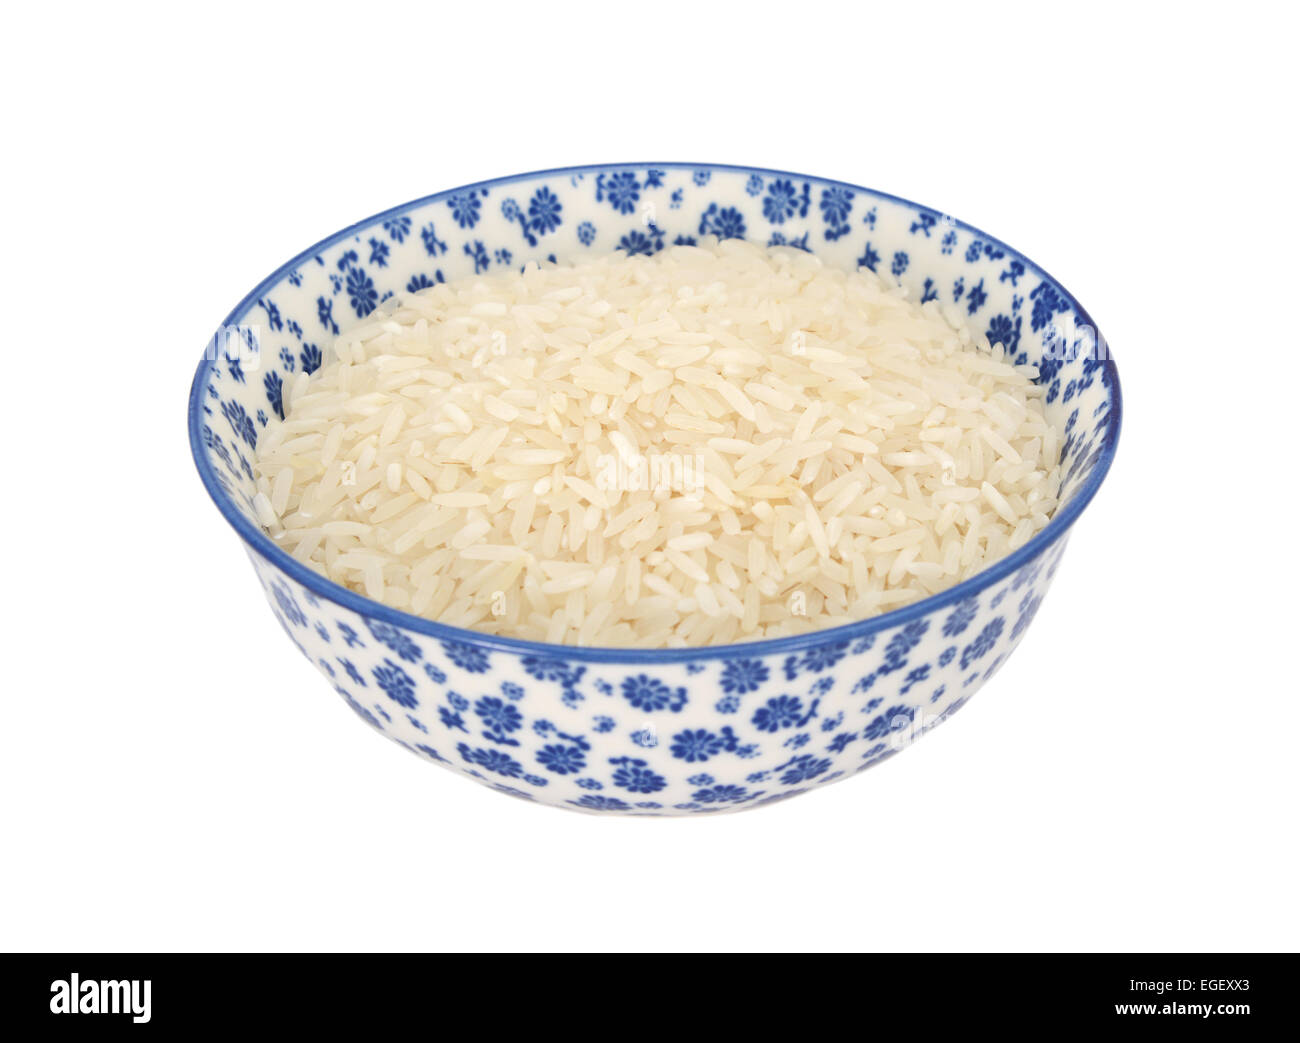 White long grain rice in a blue and white porcelain bowl with a floral design, isolated on a white background Stock Photo